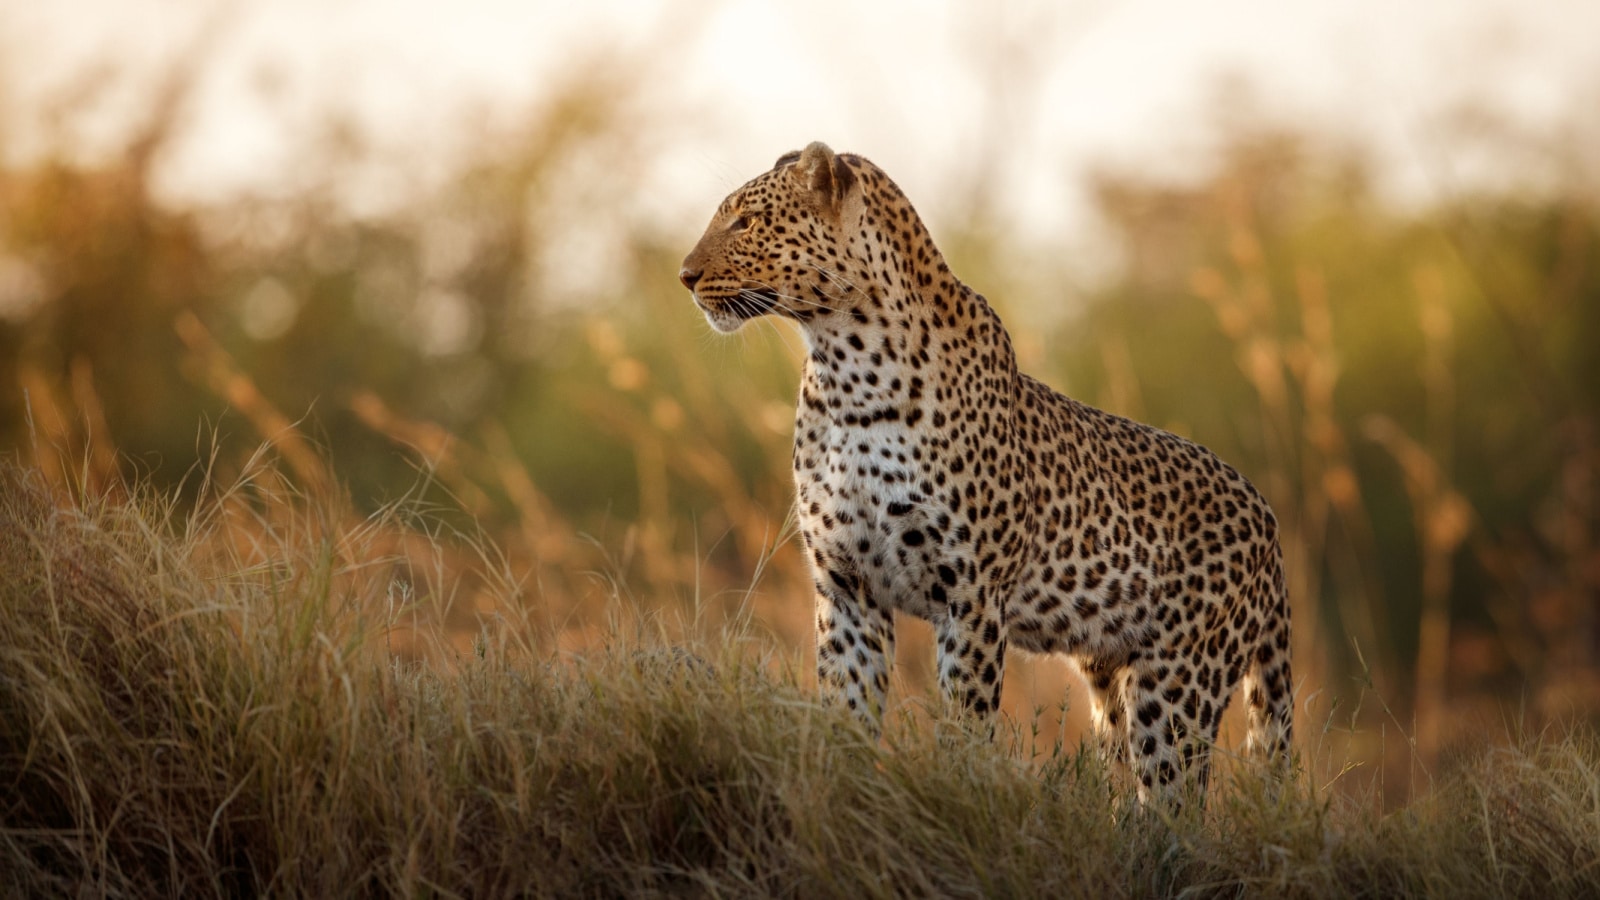 <p>Large as they seem, leopards are the smallest of the big cats. They are solitary and only sit in a group during mating. You would see them prowling alone in parks behind an African evening sunset.</p>